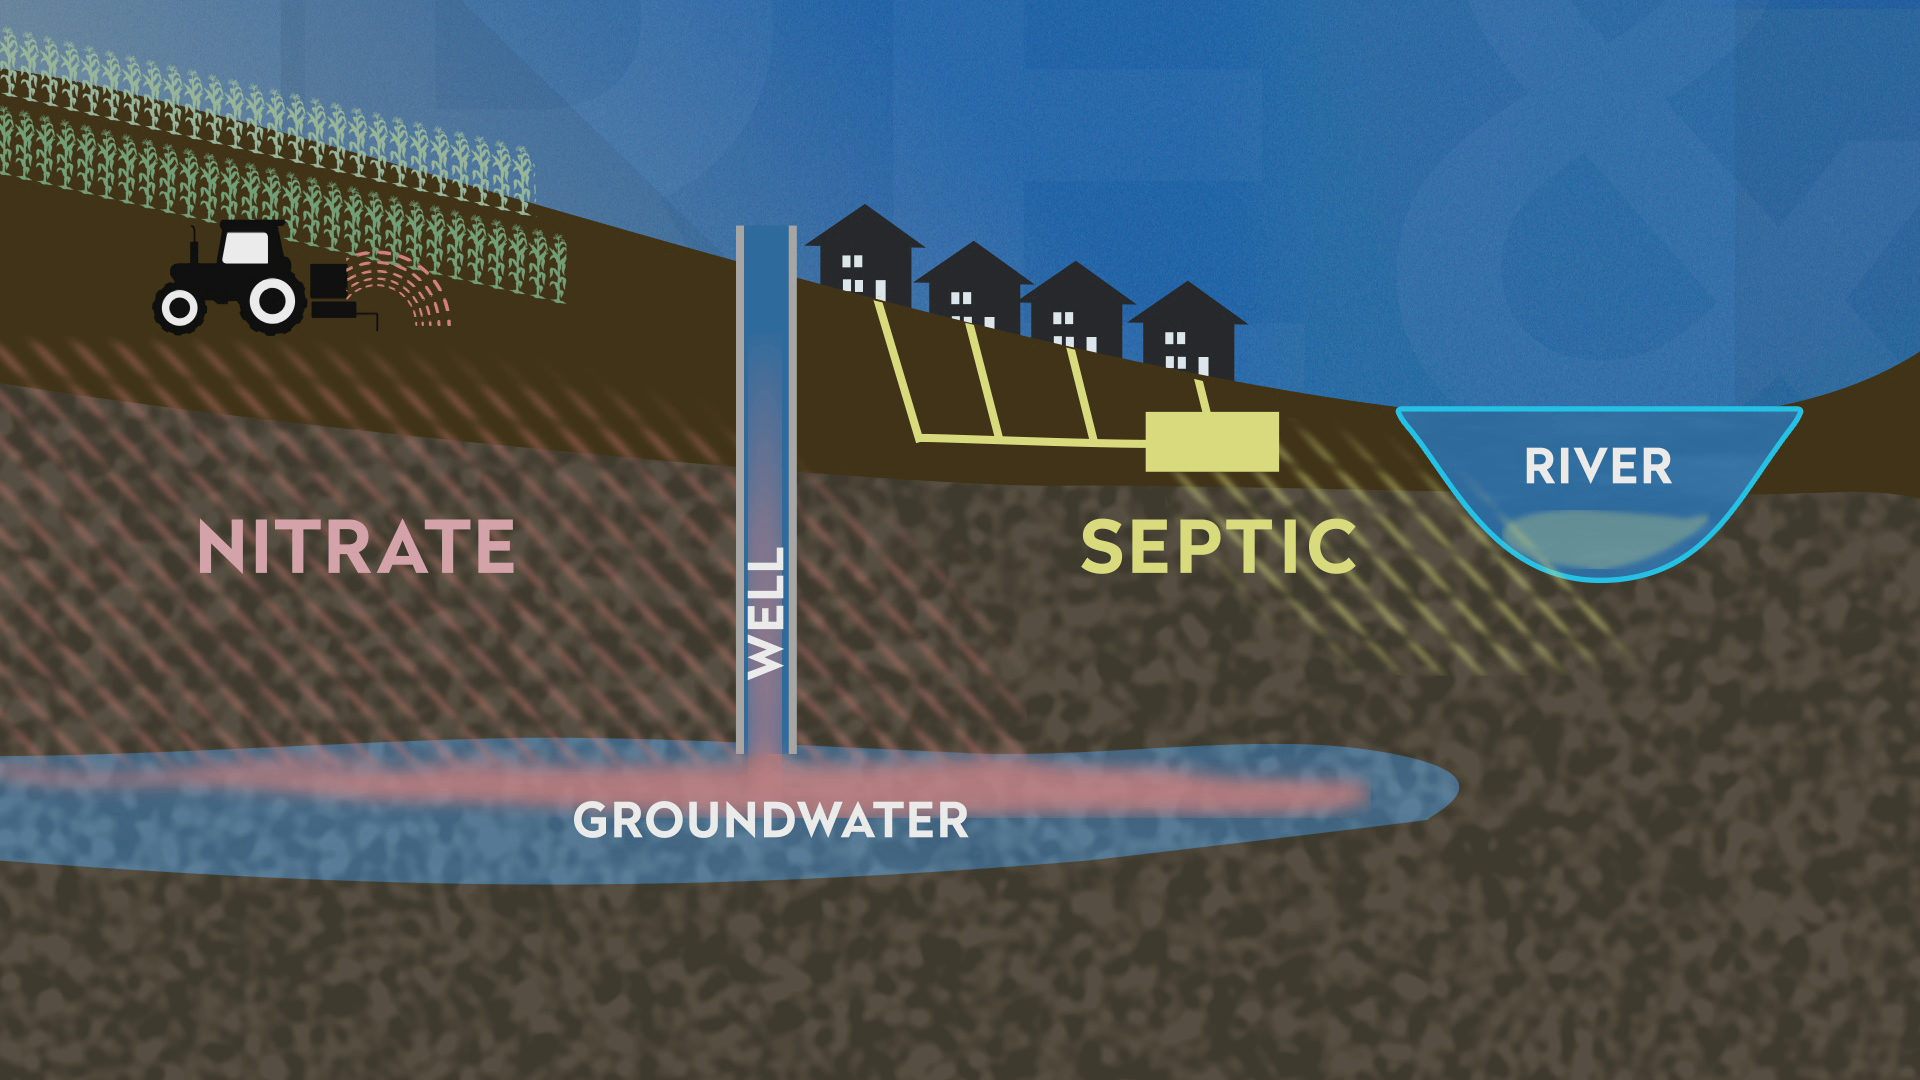 An illustration nitrates from manure and septic systems interacting with soil, groundwater and surface water.